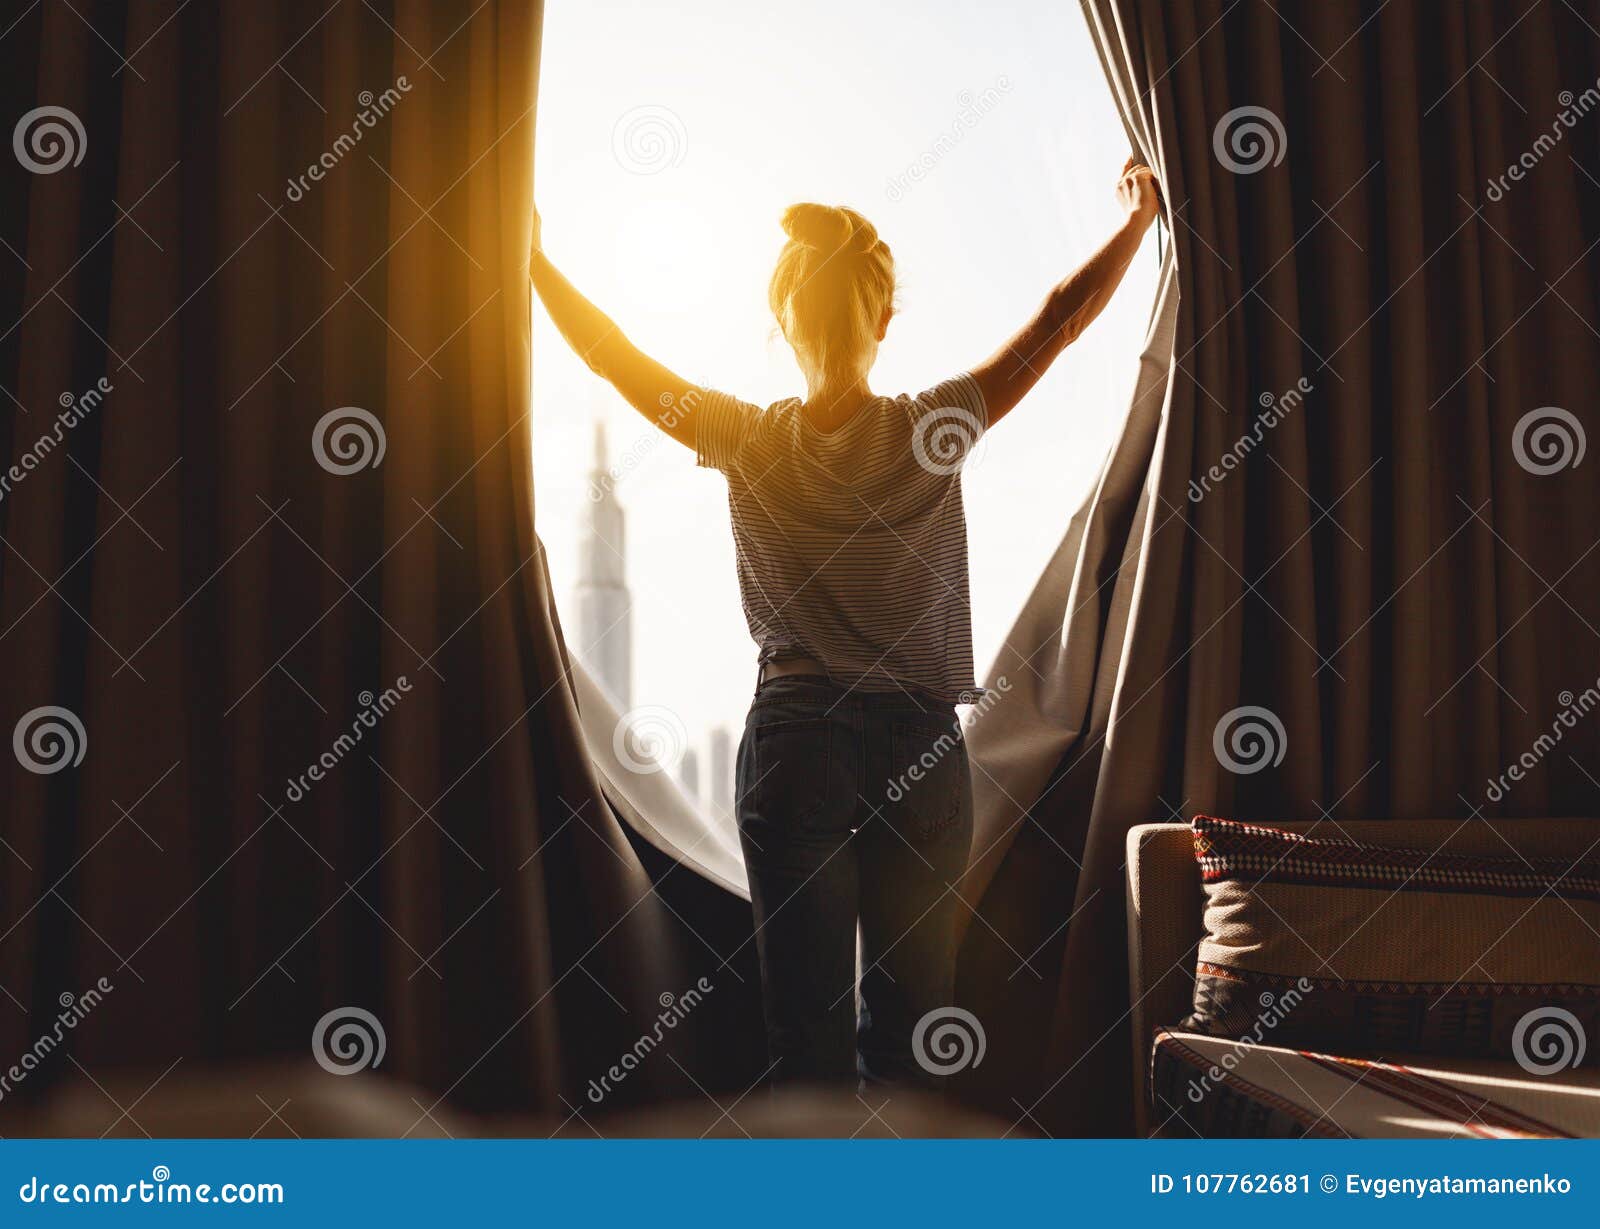 Happy Woman Stretches And Opens Curtains At Window In Morning Stock ... Open Window At Morning